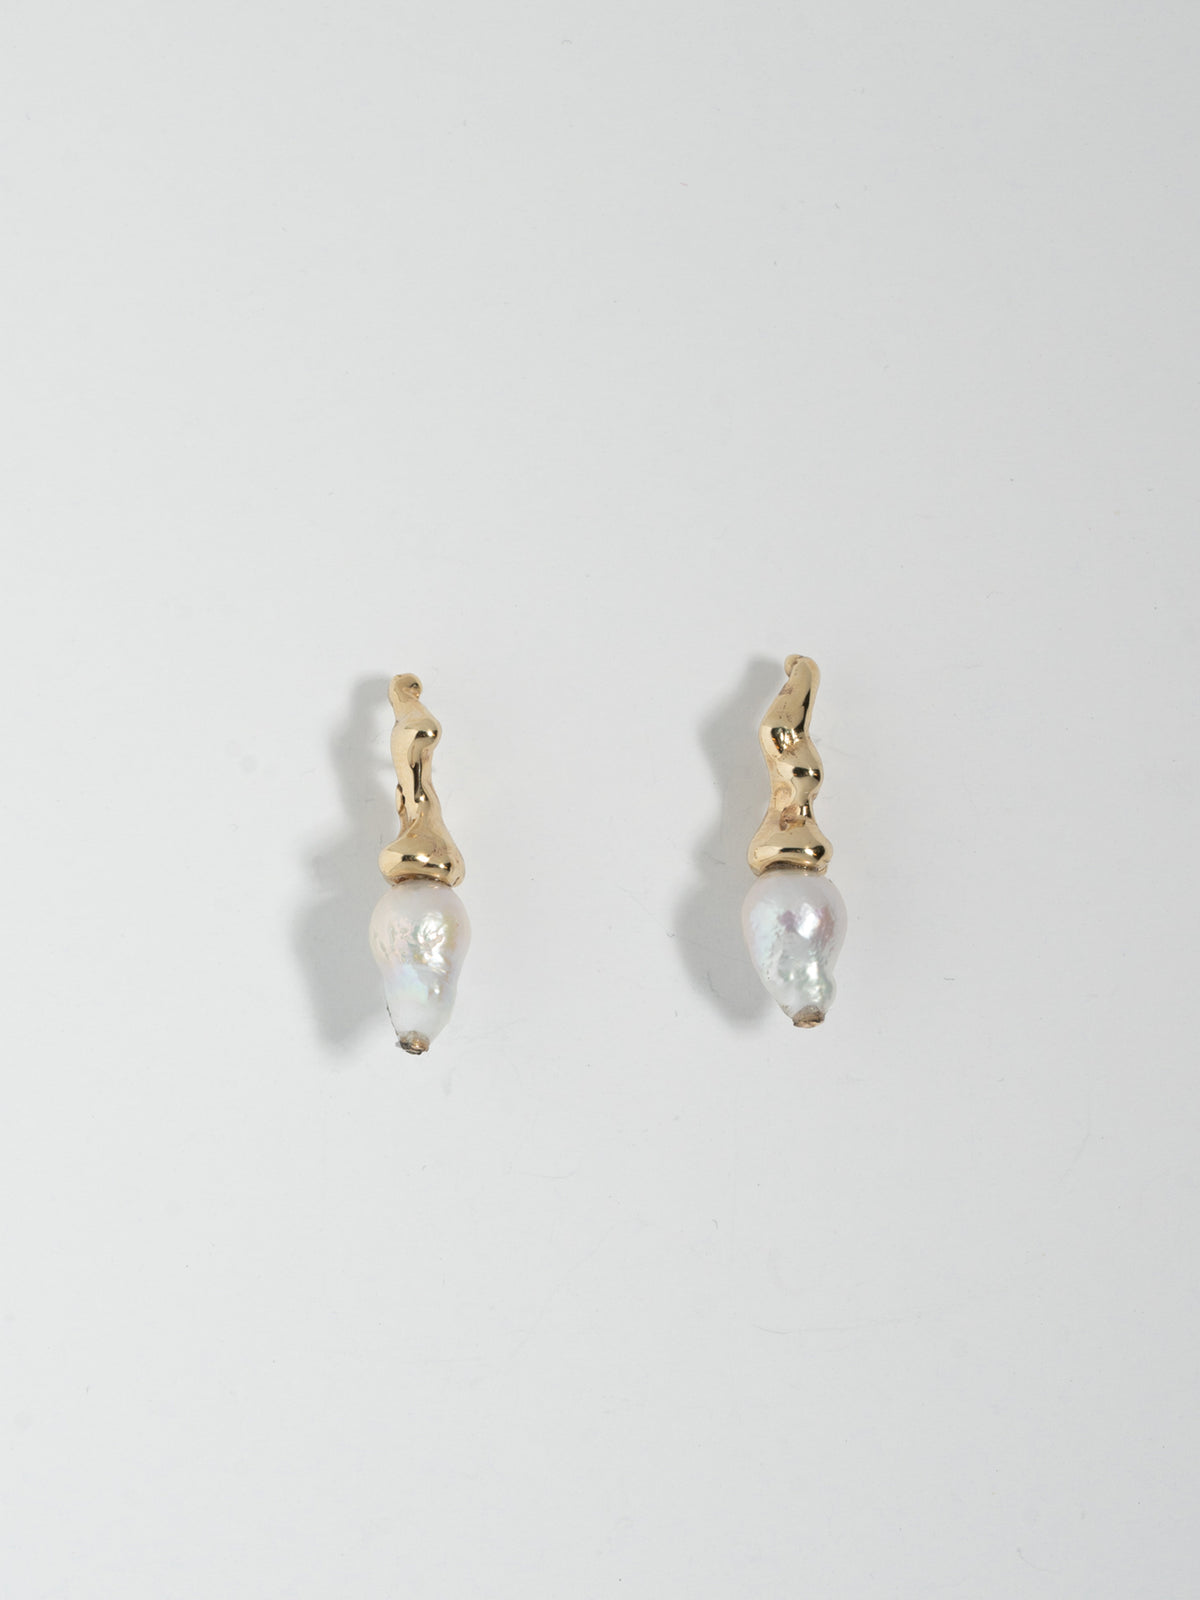 Product image of FARIS SPRIG PERLA Earrings in 14k gold with petite, white baroque pearls. Laid side by side, front view